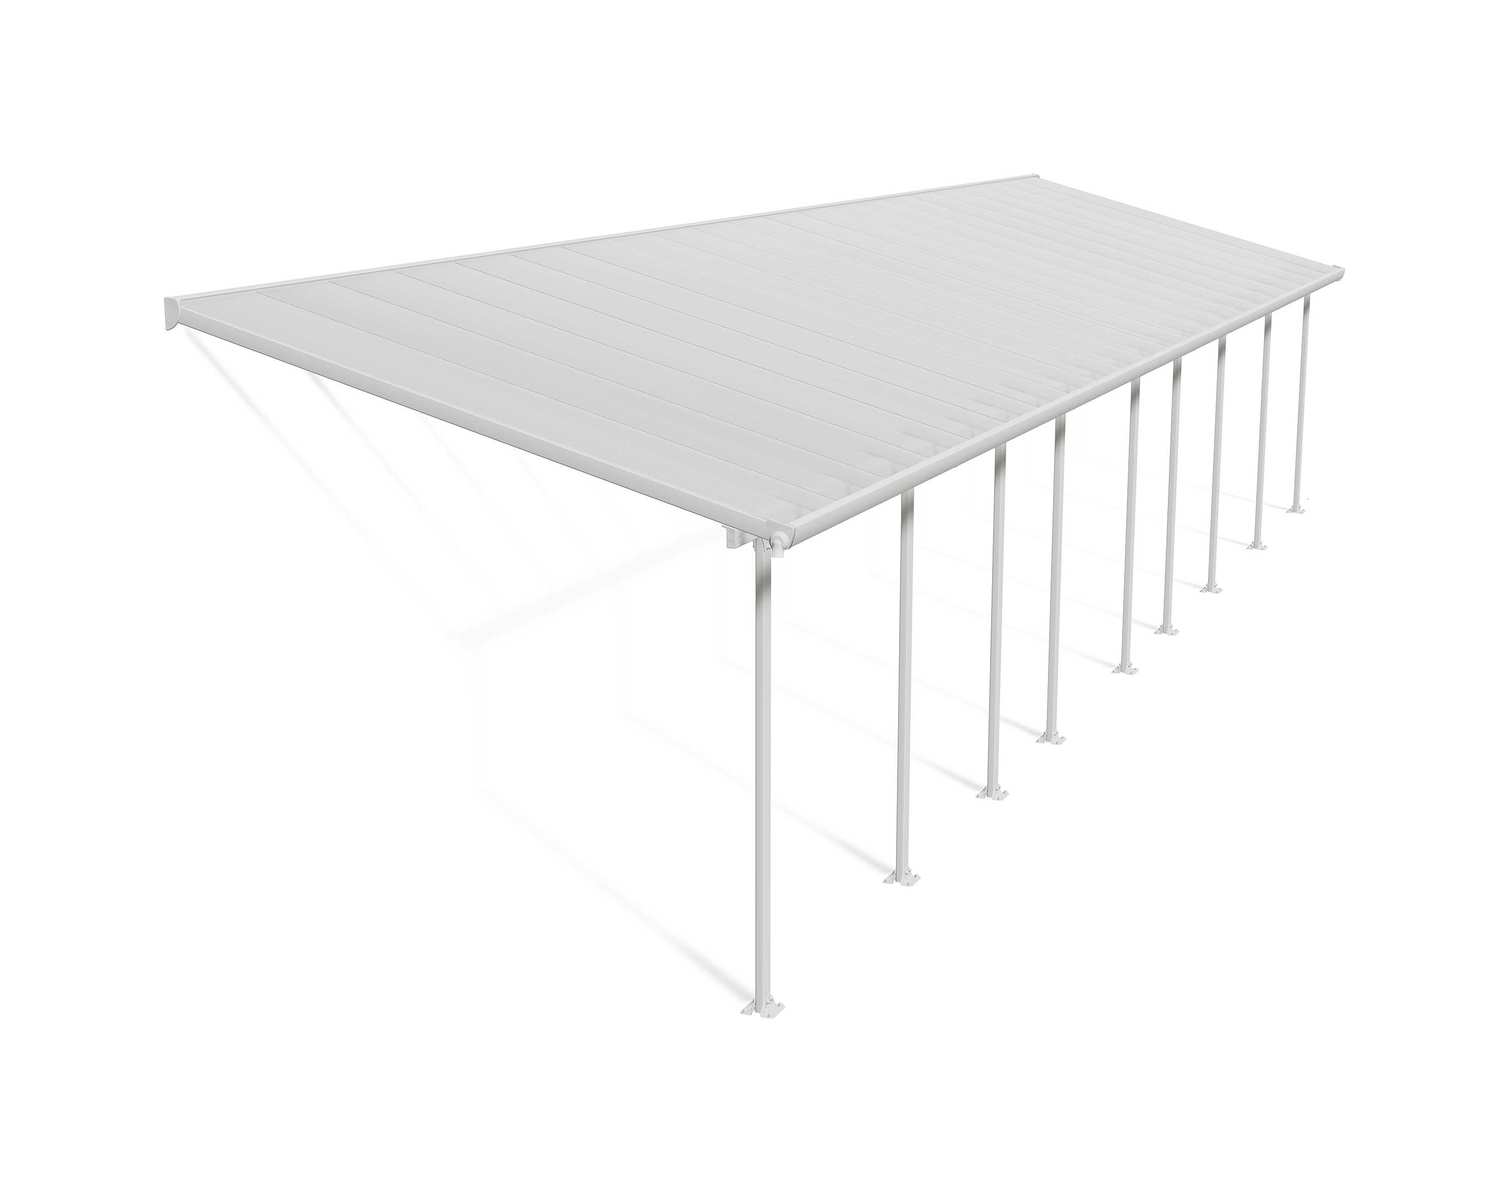 Feria 10 ft. x 44 ft. White Aluminium Patio Cover With 9 Posts, Clear Twin-Wall Polycarbonate Roof Panels.